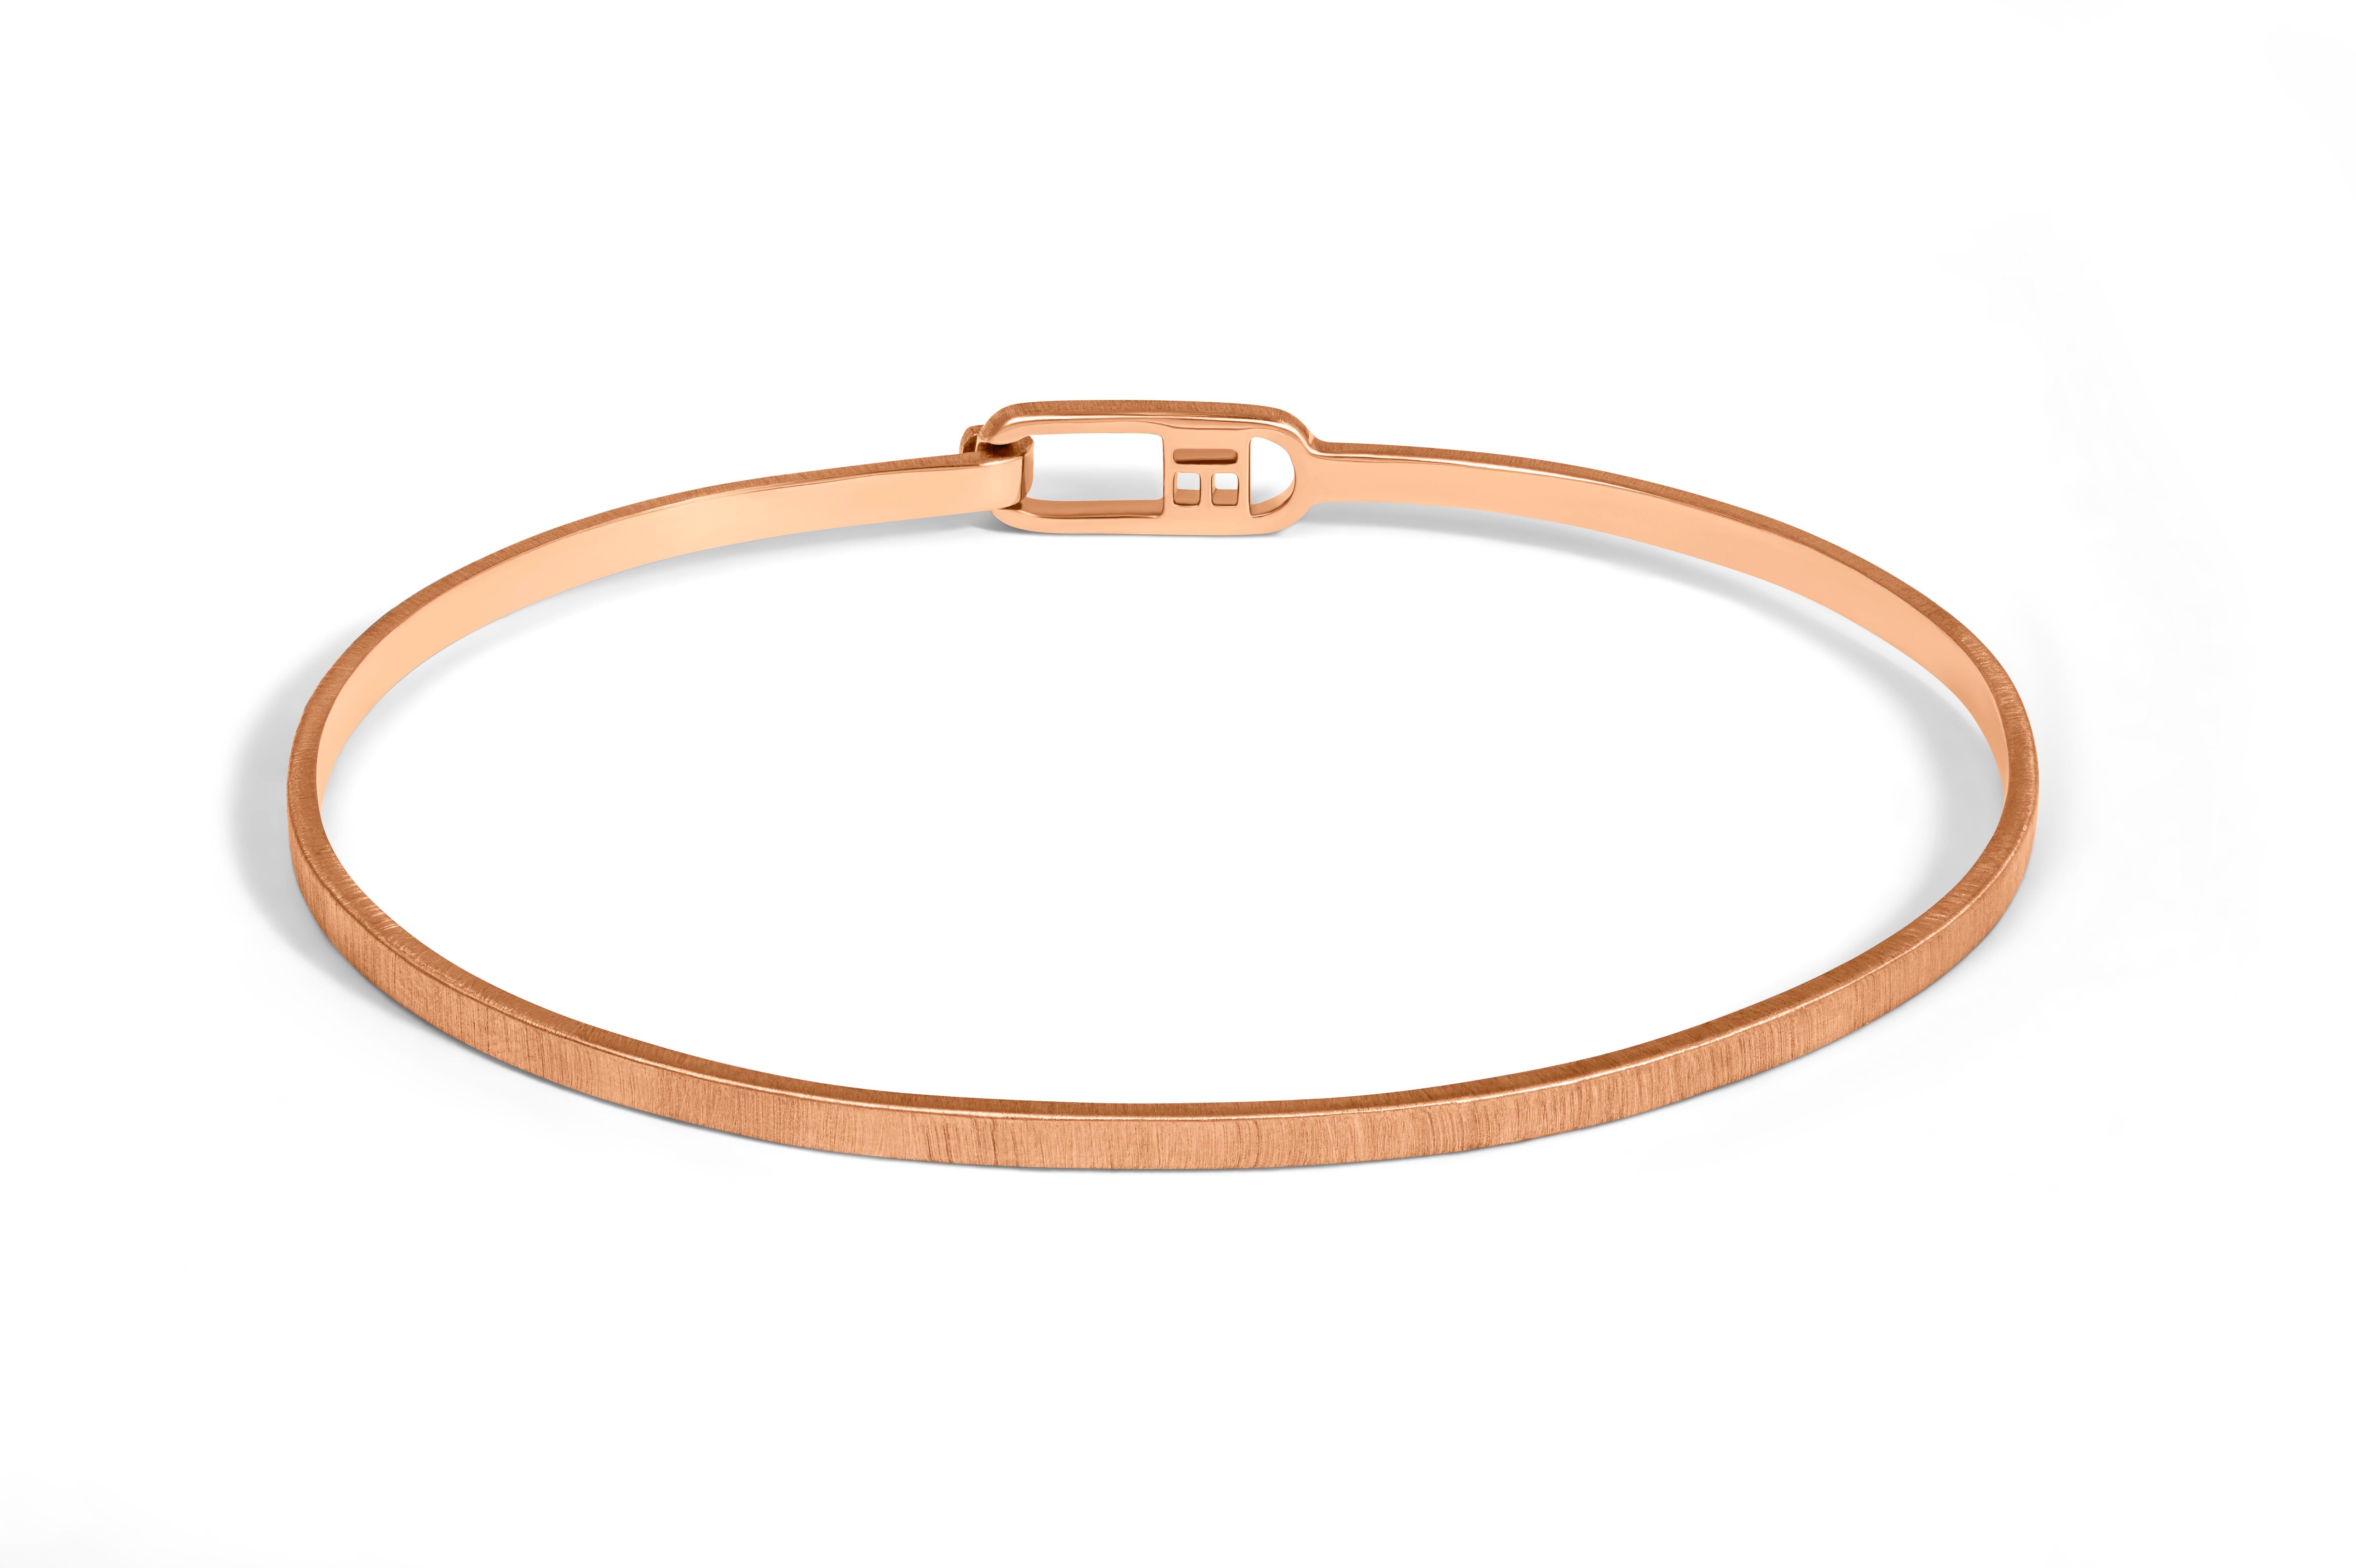 T-Bangle in Brushed 18K Rose Gold, Size M For Sale 1